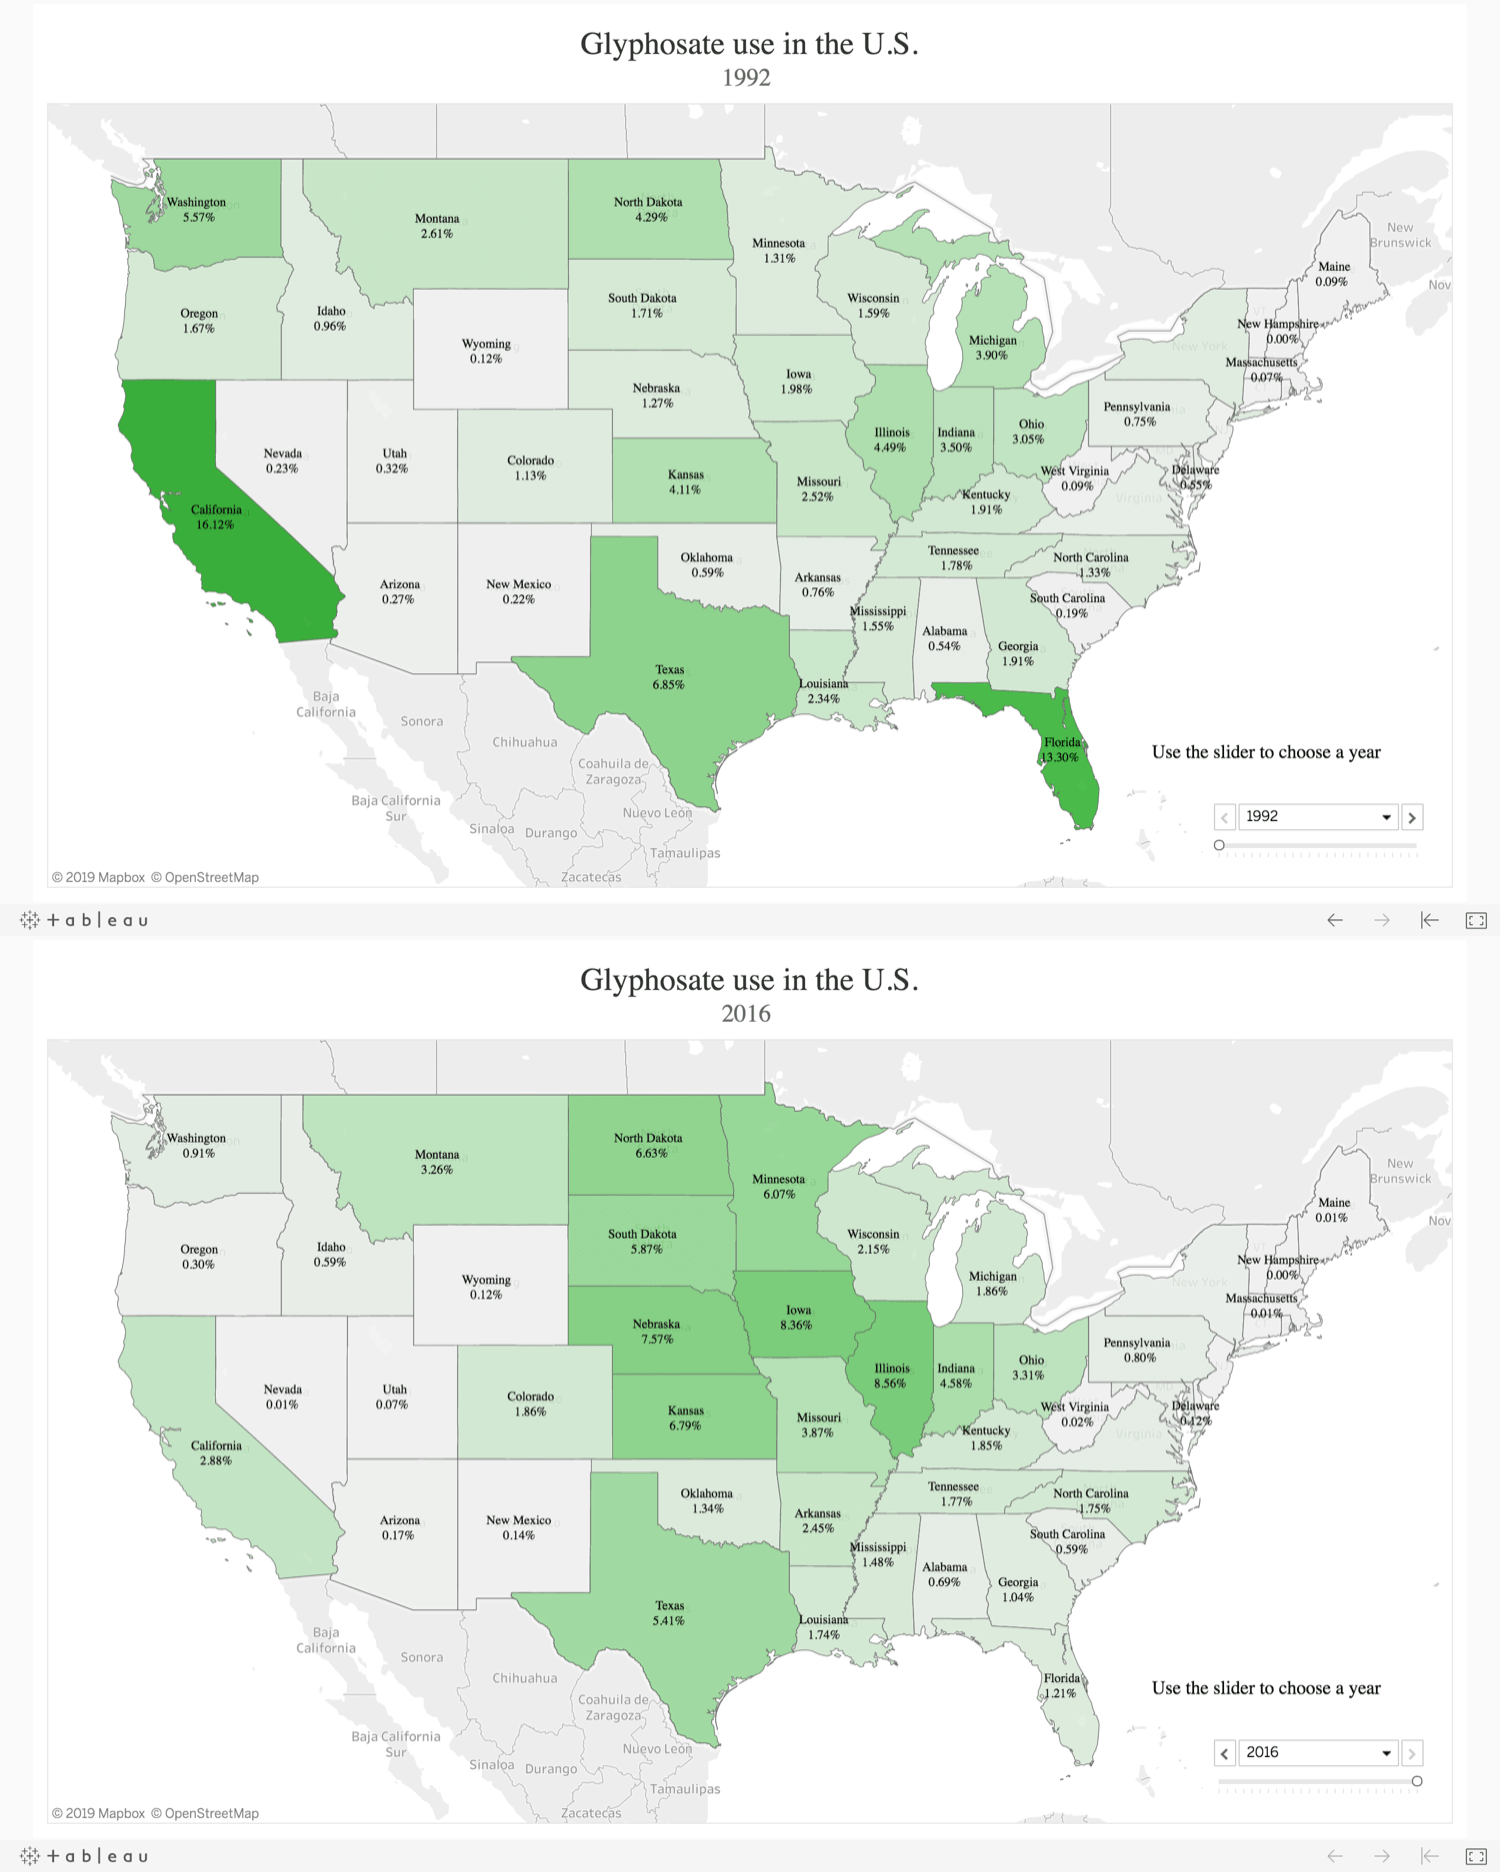 a comparison of the use of glysophate in the U.S. in 1992, it was mostly used in California, Texas, and Florida. In 2016, it was mostly concentrated in the Midwest